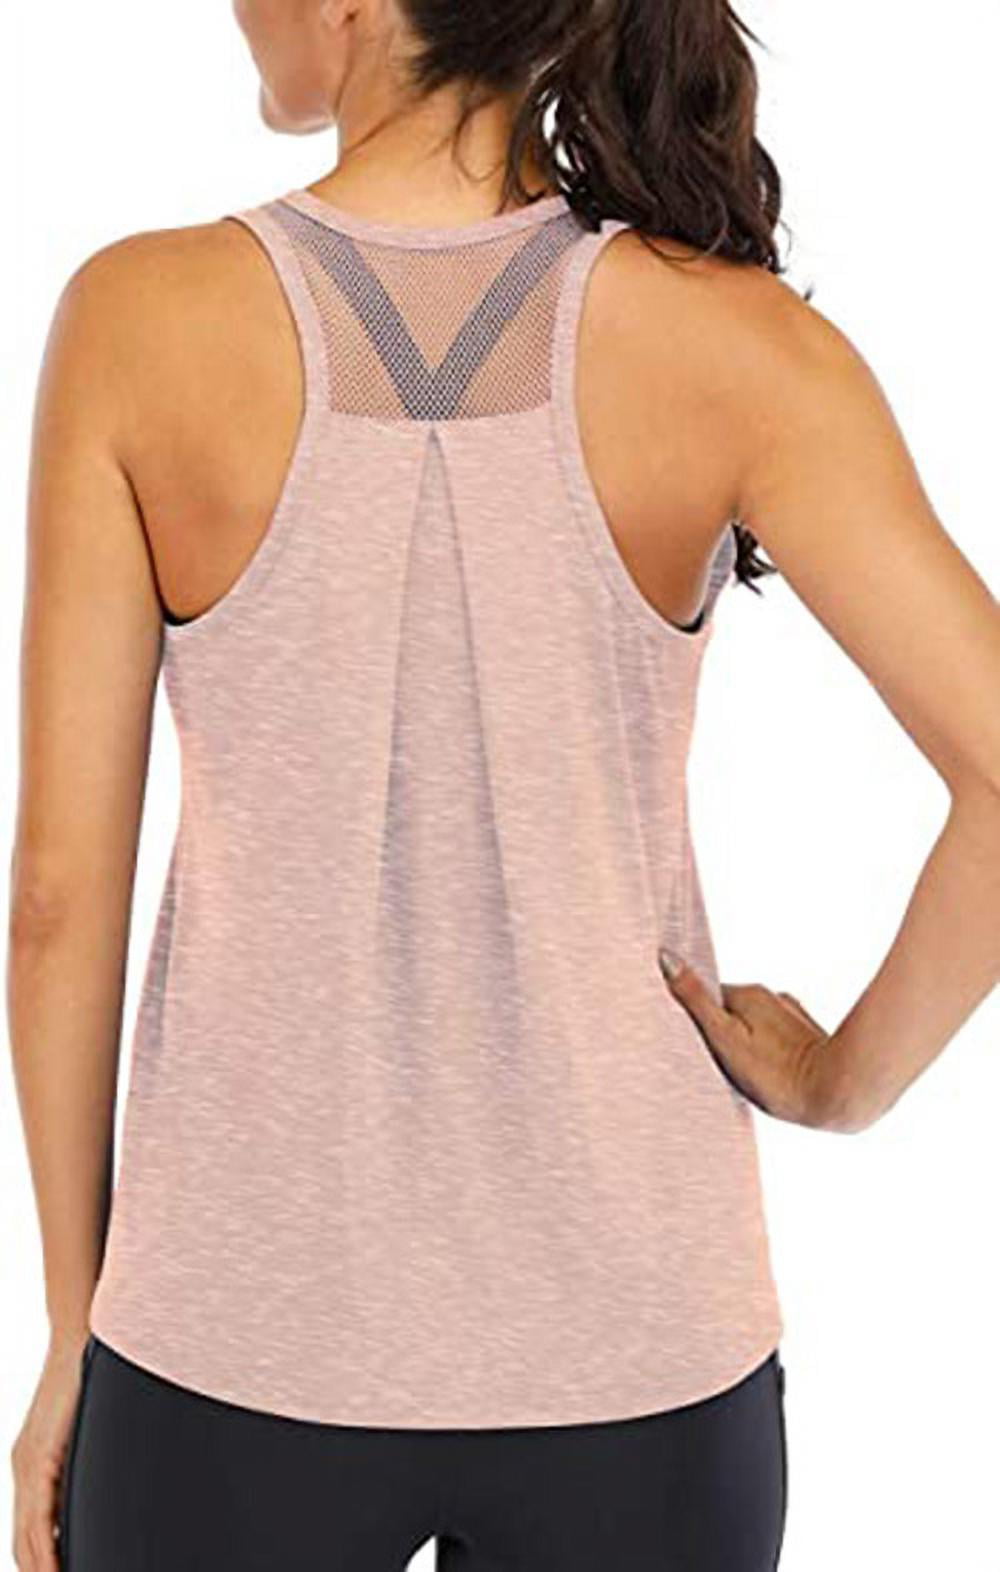 Workout Tops for Women Loose fit Racerback Tank Tops for Women